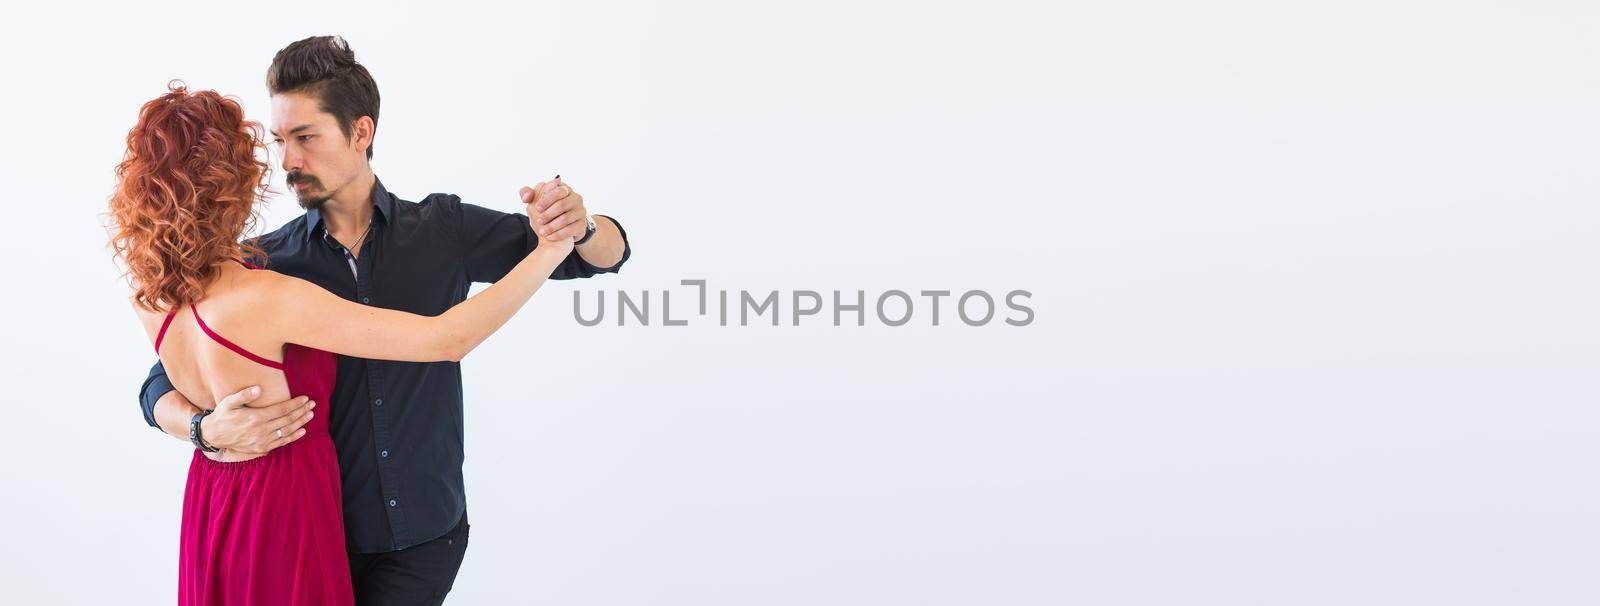 Banner social dance, bachata, kizomba, salsa, tango concept - Woman dressed in red dress and man in a black costume over white background with copyspace by Satura86